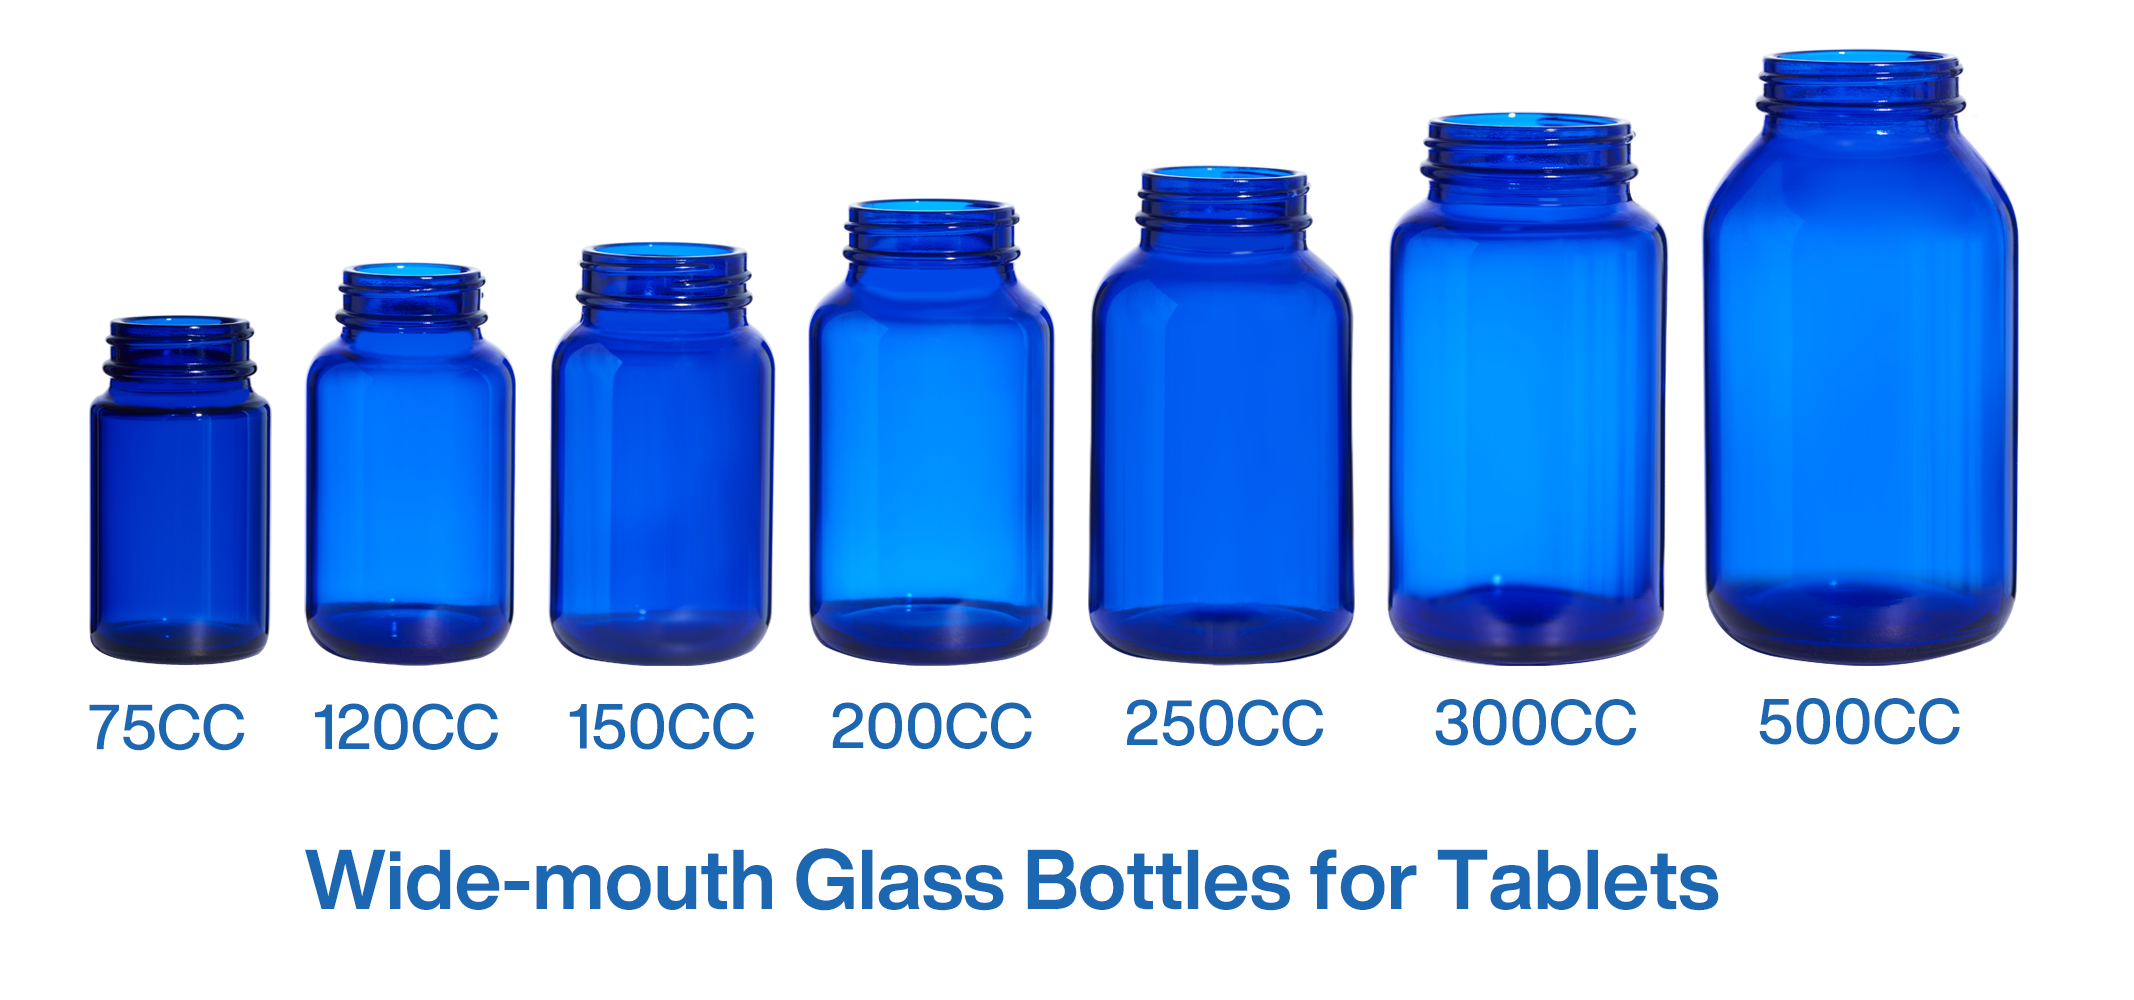 Wide-mouth Glass Bottles for Tablets.png